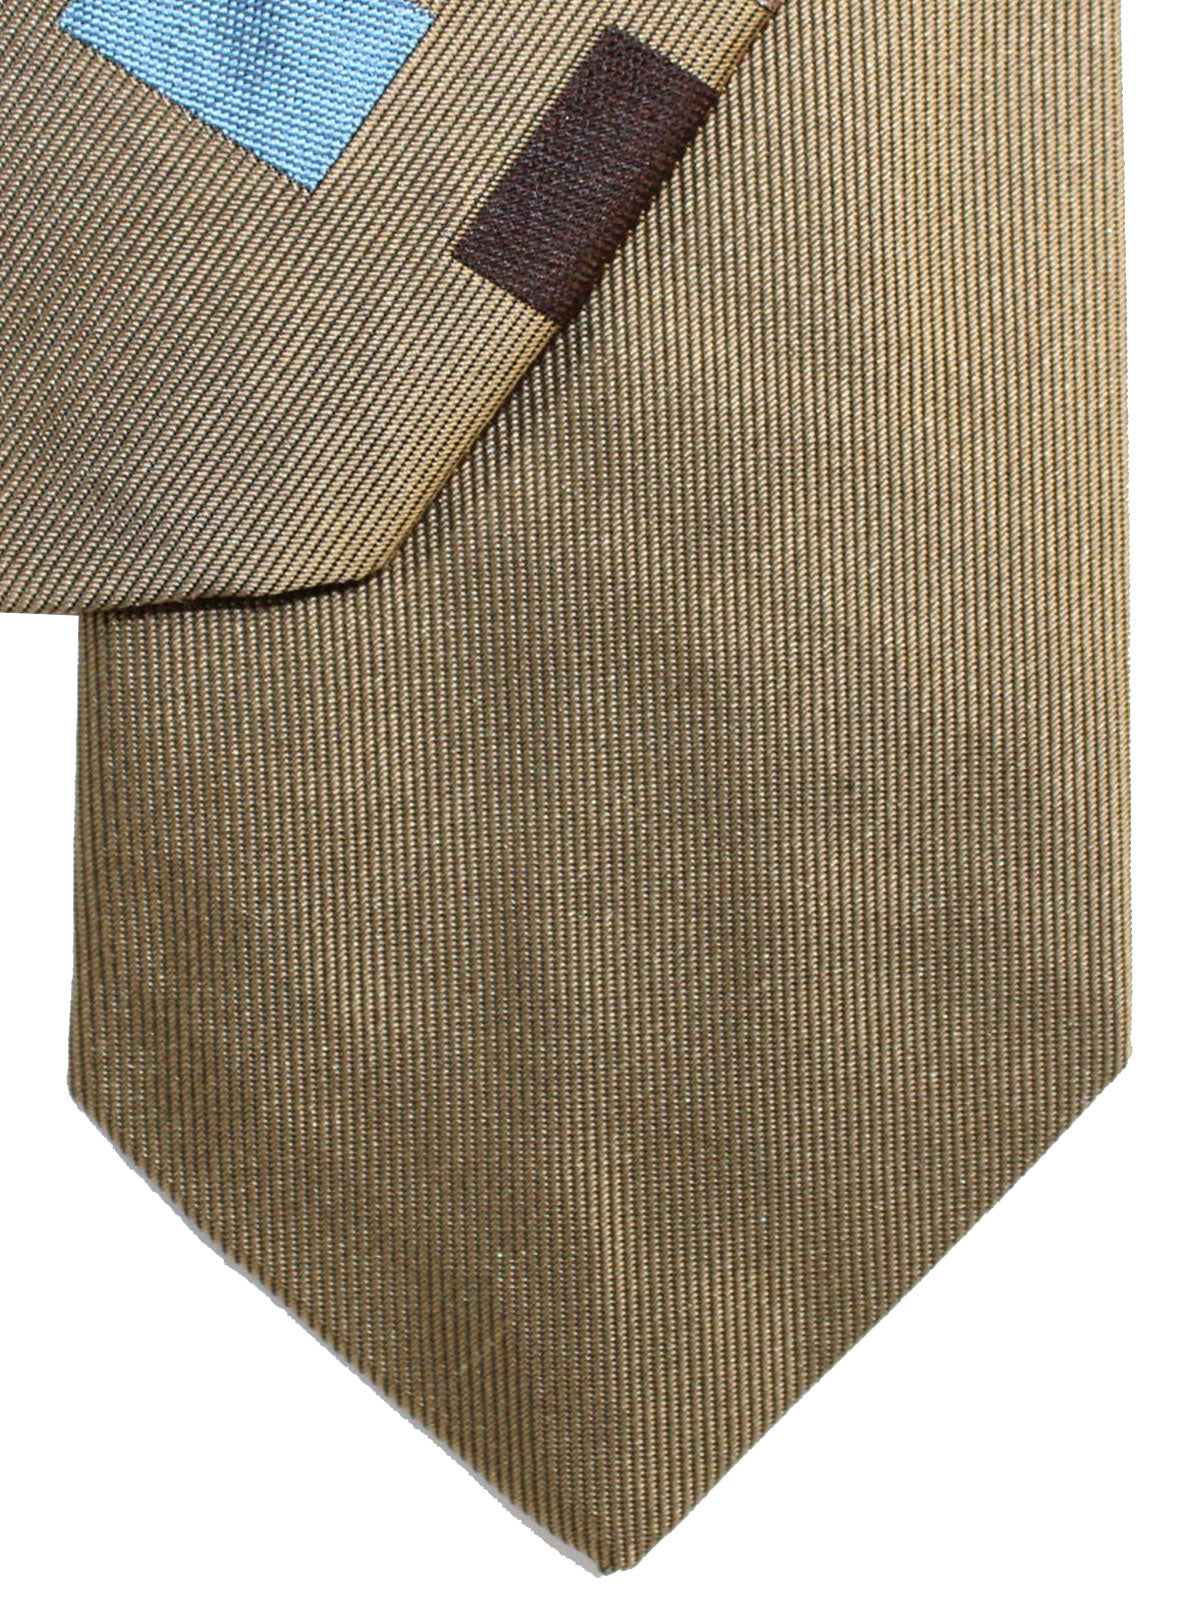 Gene Meyer Necktie Taupe Gray Blue Geometric - Hand Made In Italy